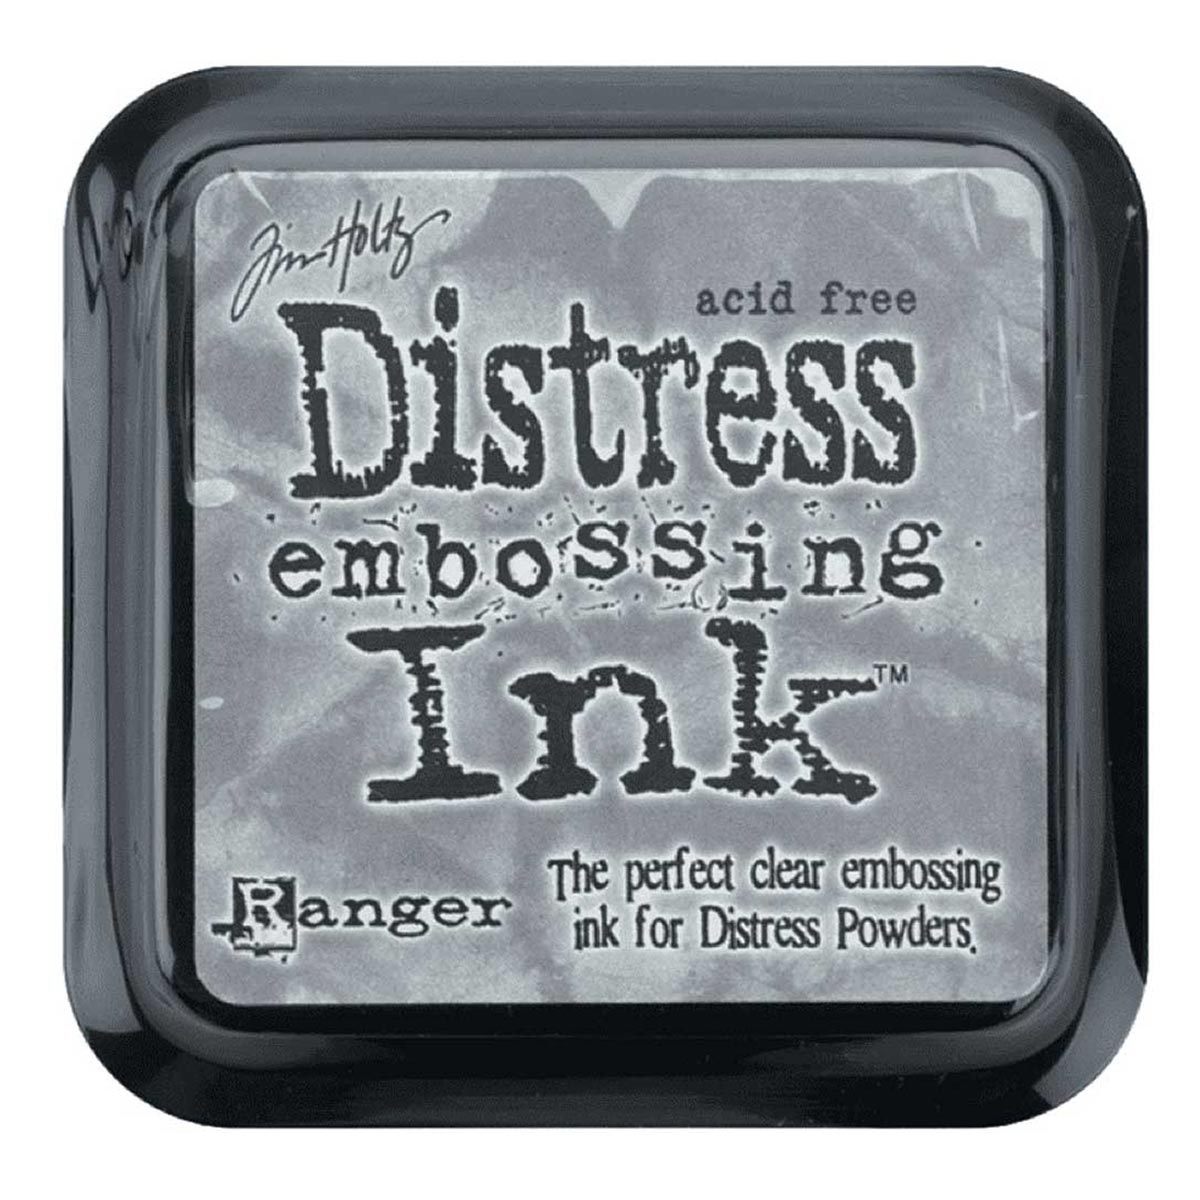 Tim Holtz Distress Embossing Ink Pad Clear